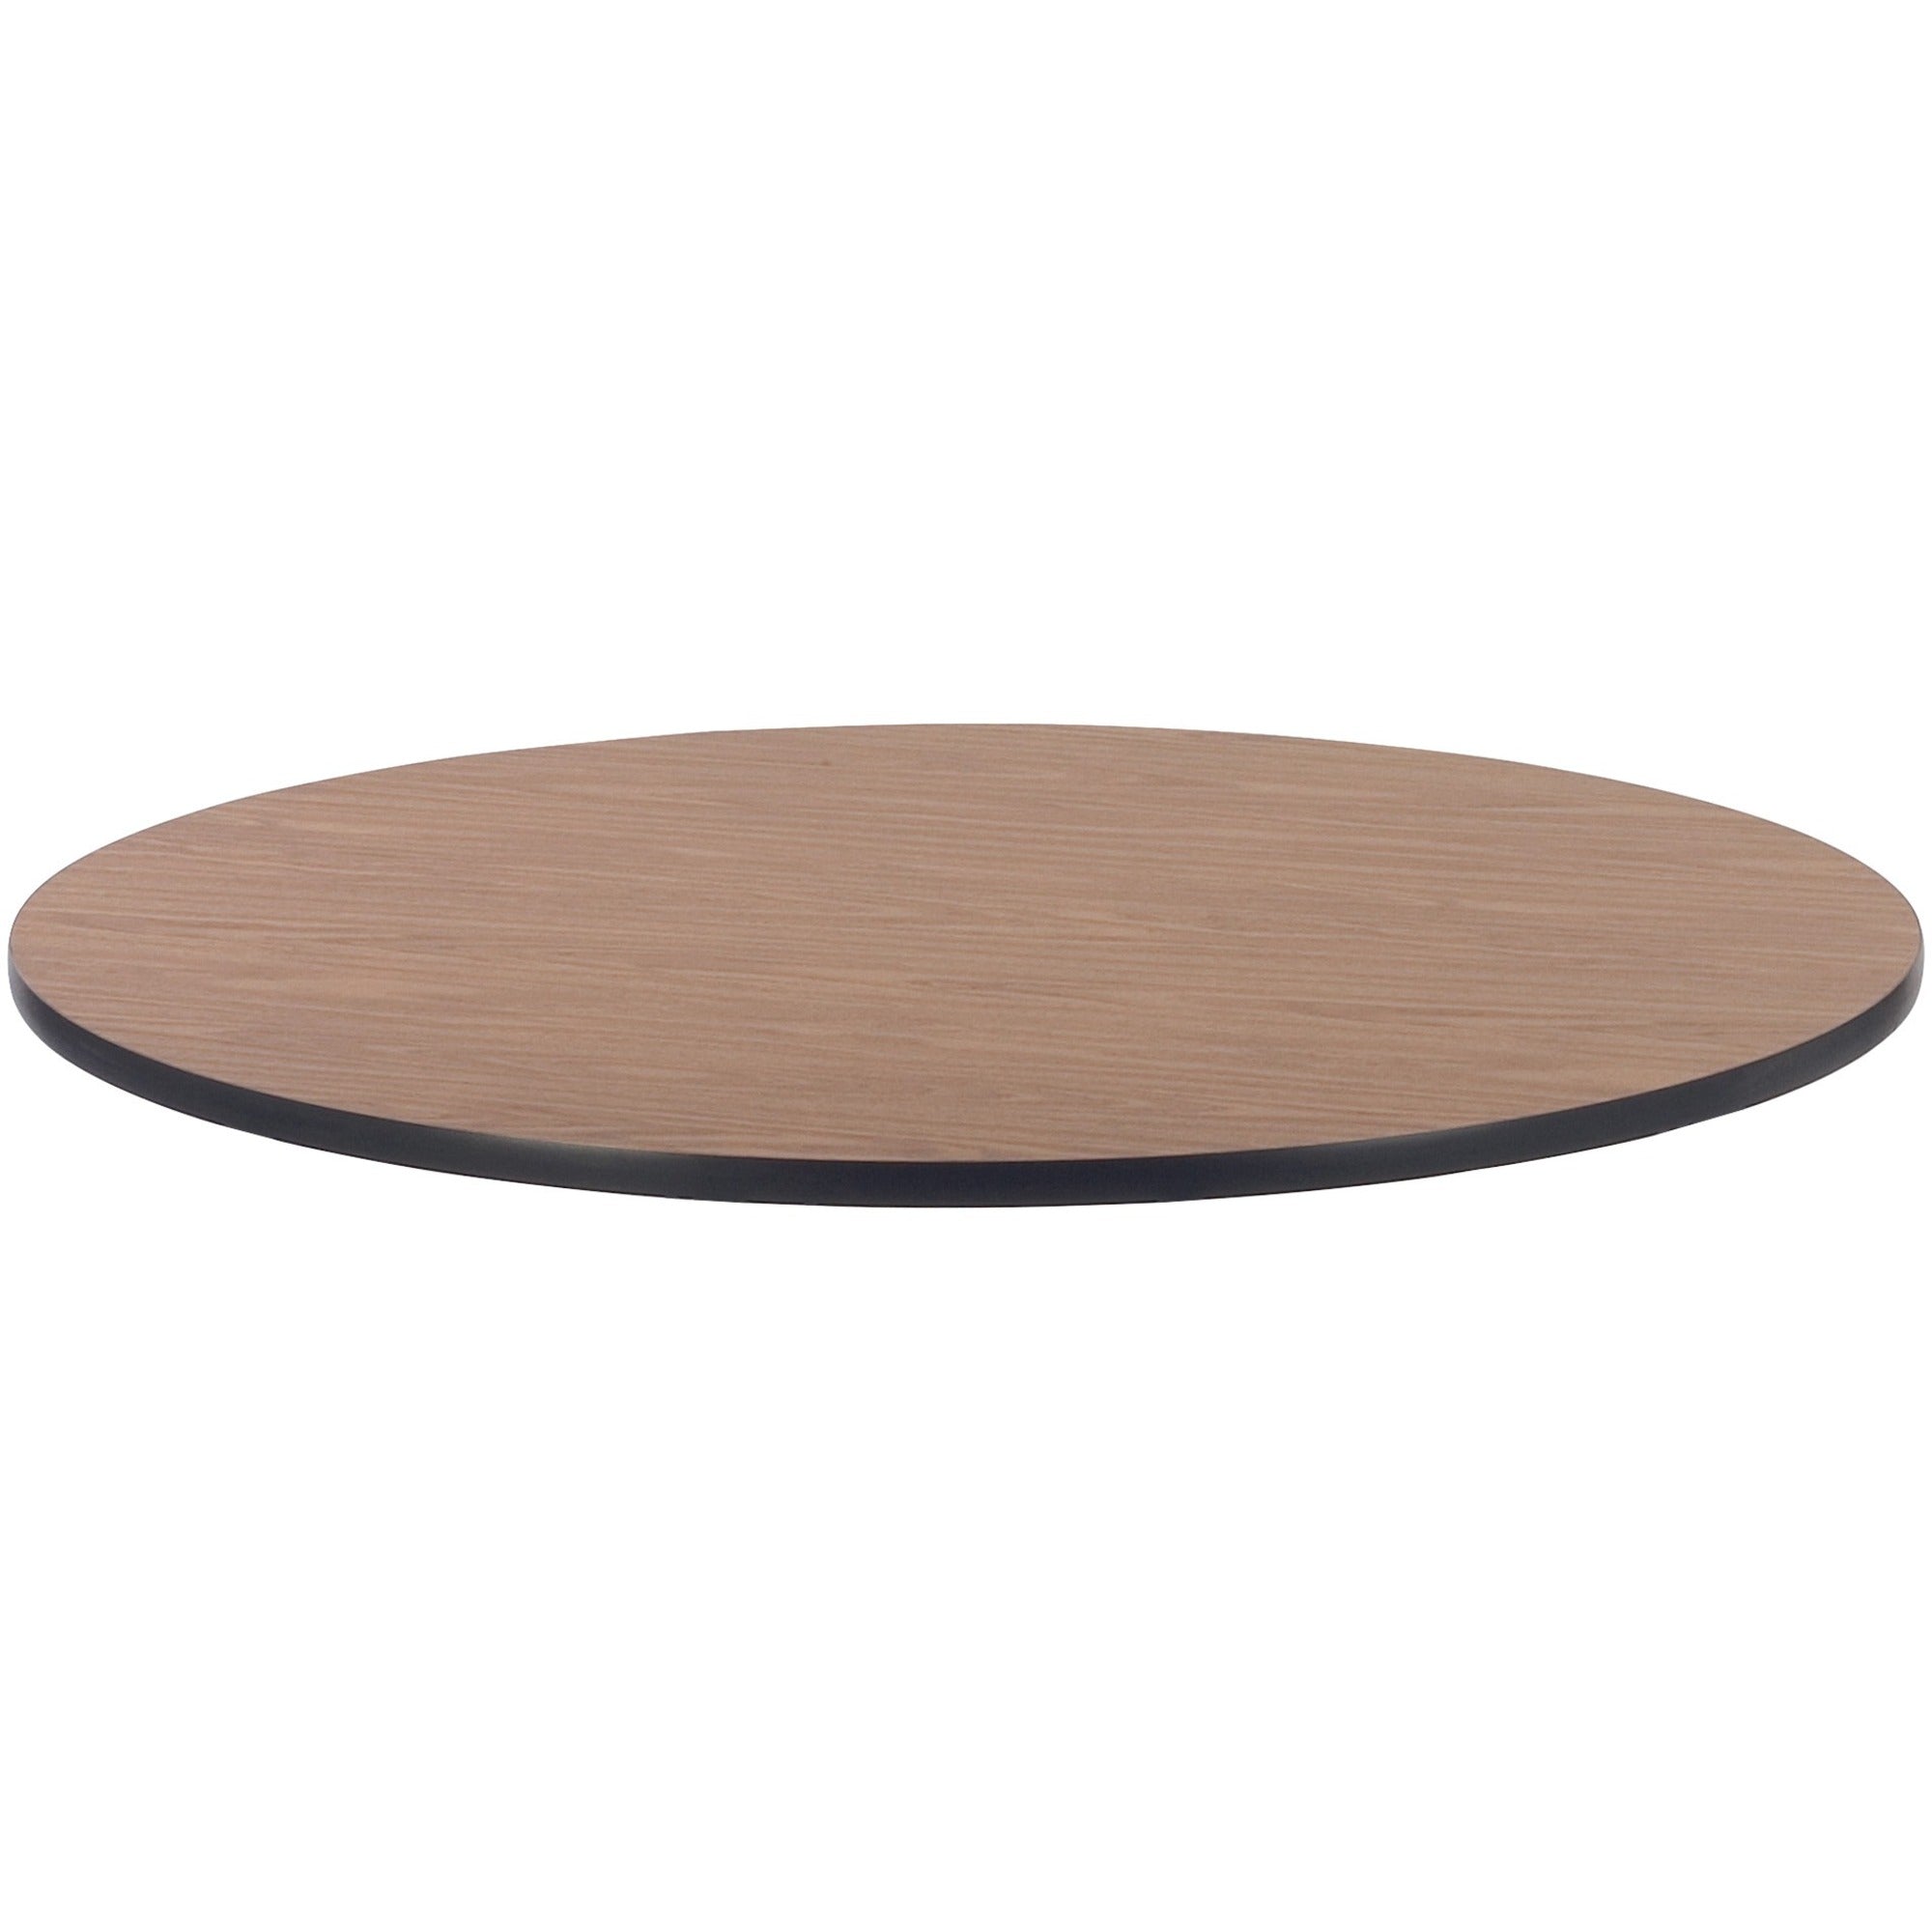 lorell-classroom-activity-tabletop-for-table-tophigh-pressure-laminate-hpl-round-medium-oak-top-x-113-table-top-thickness-x-48-table-top-diameter-assembly-required-1-each_llr99897 - 1